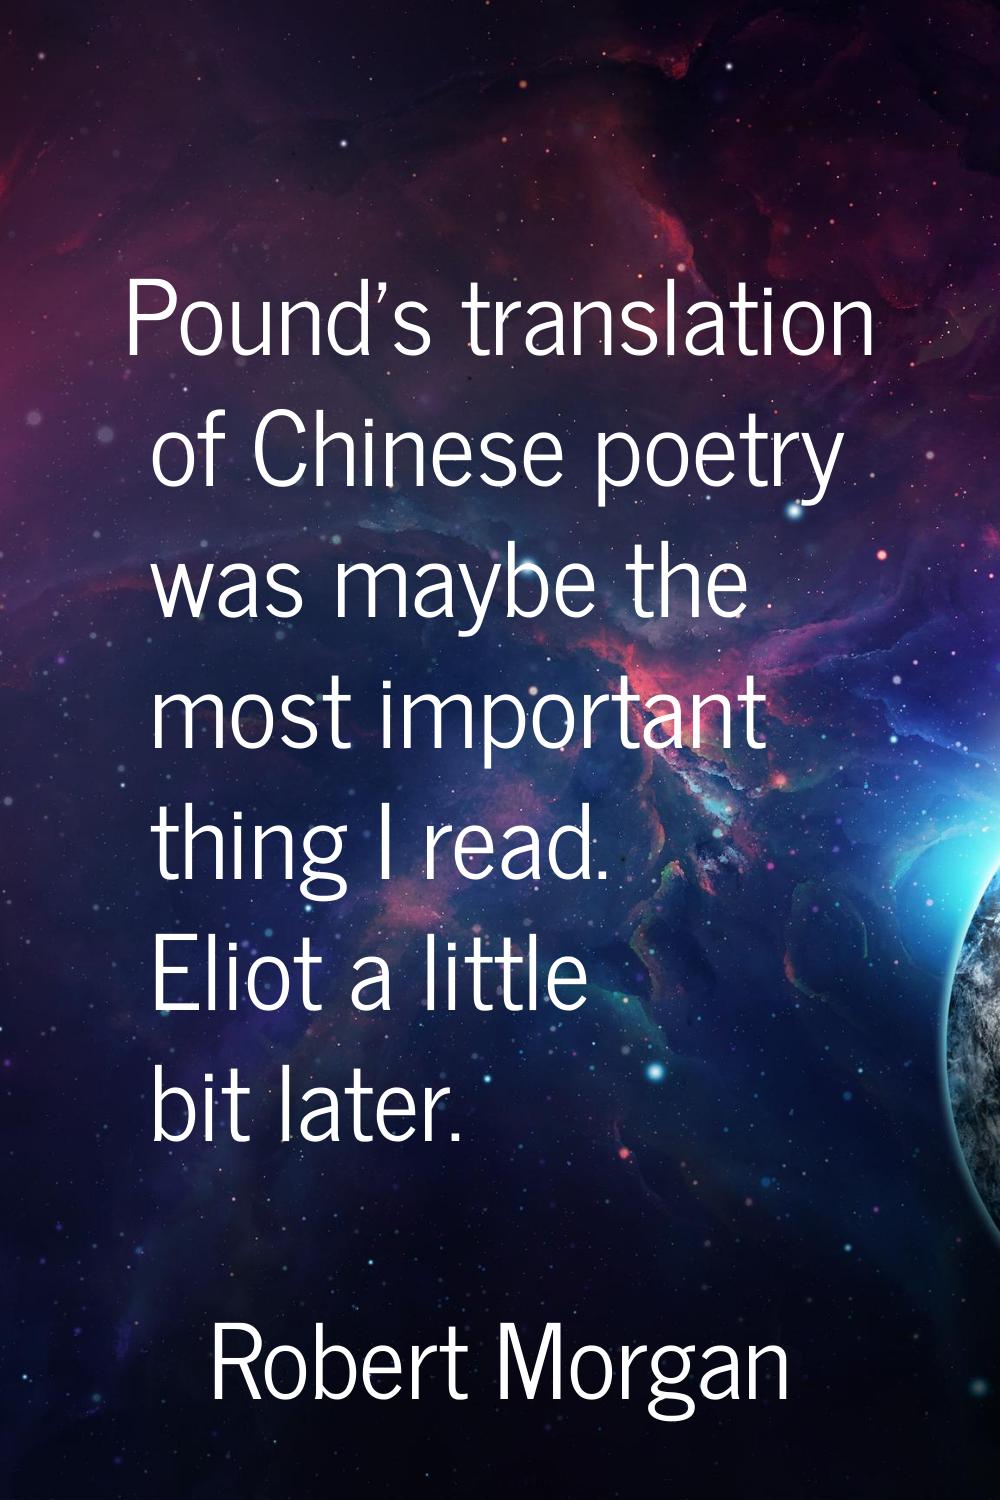 Pound's translation of Chinese poetry was maybe the most important thing I read. Eliot a little bit